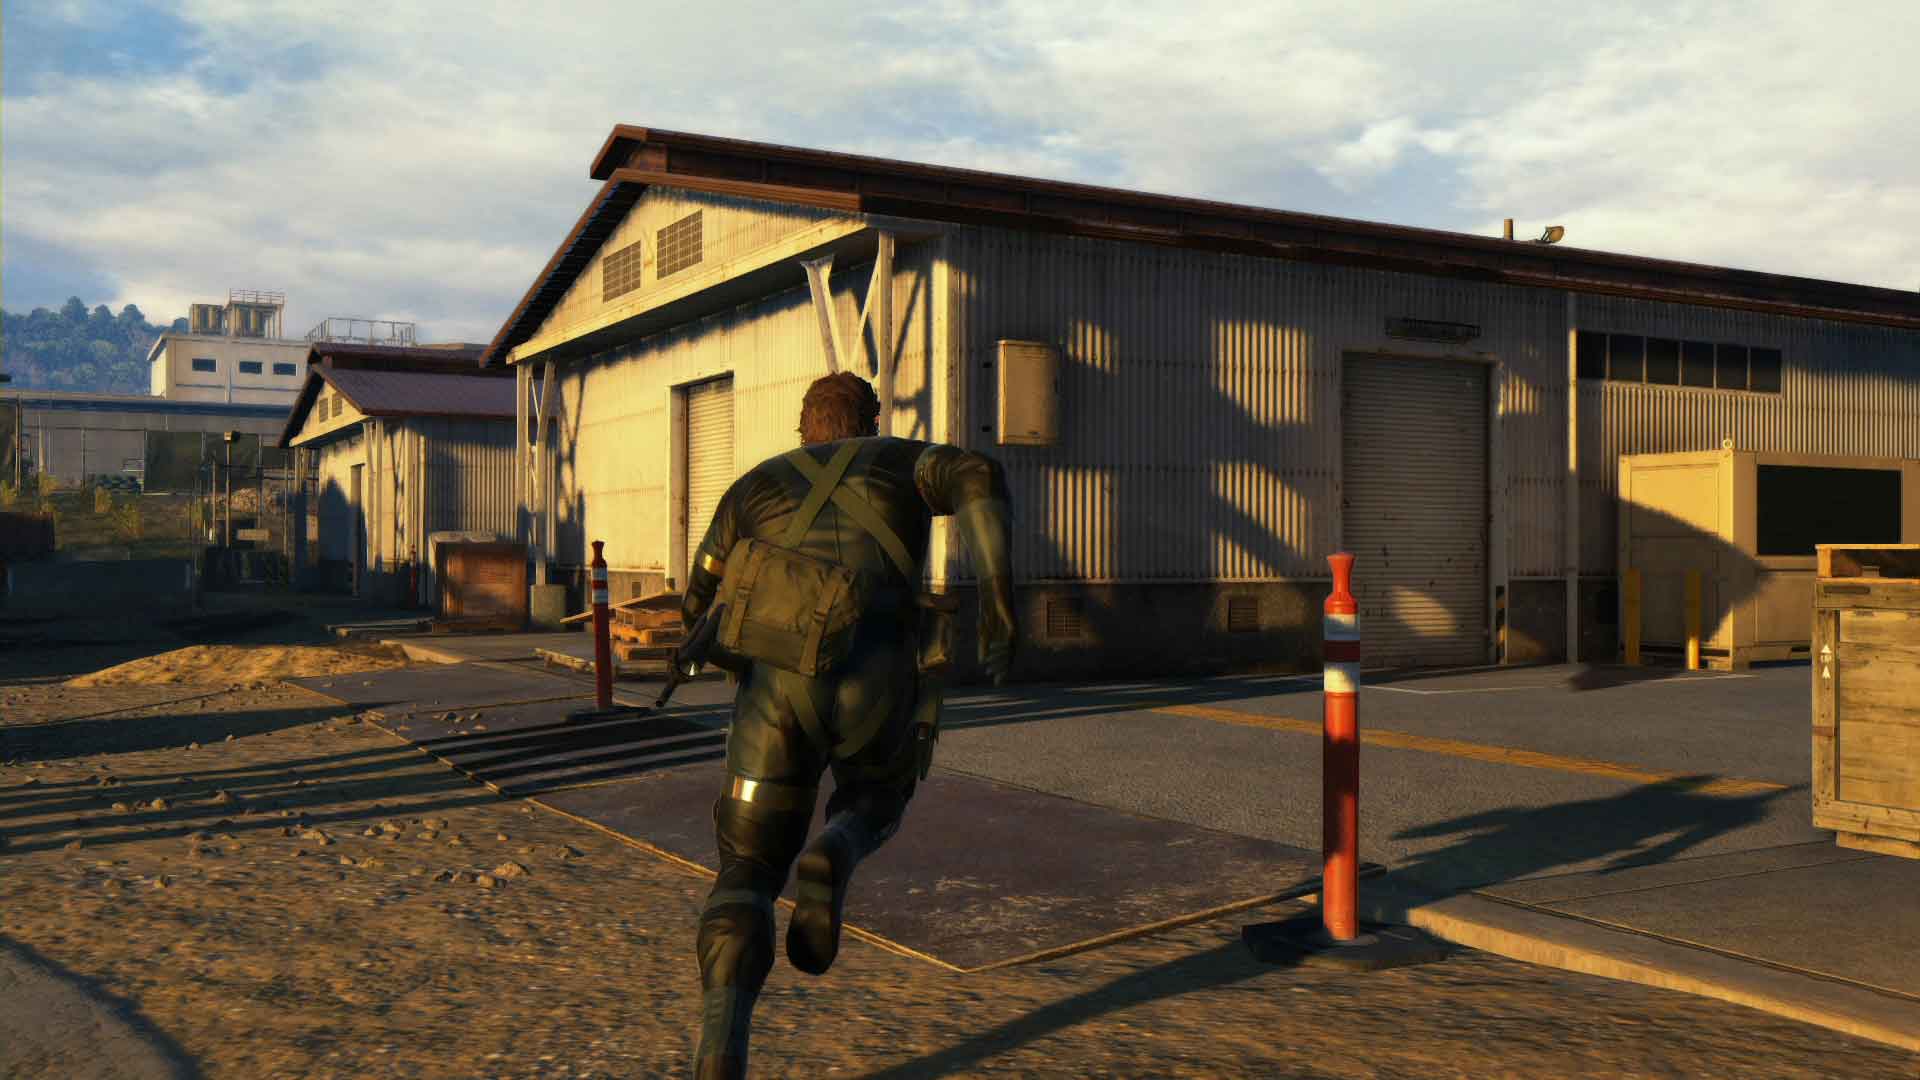 metal-gear-solid-v-ground-zeroes-on-ps4-price-history-screenshots-discounts